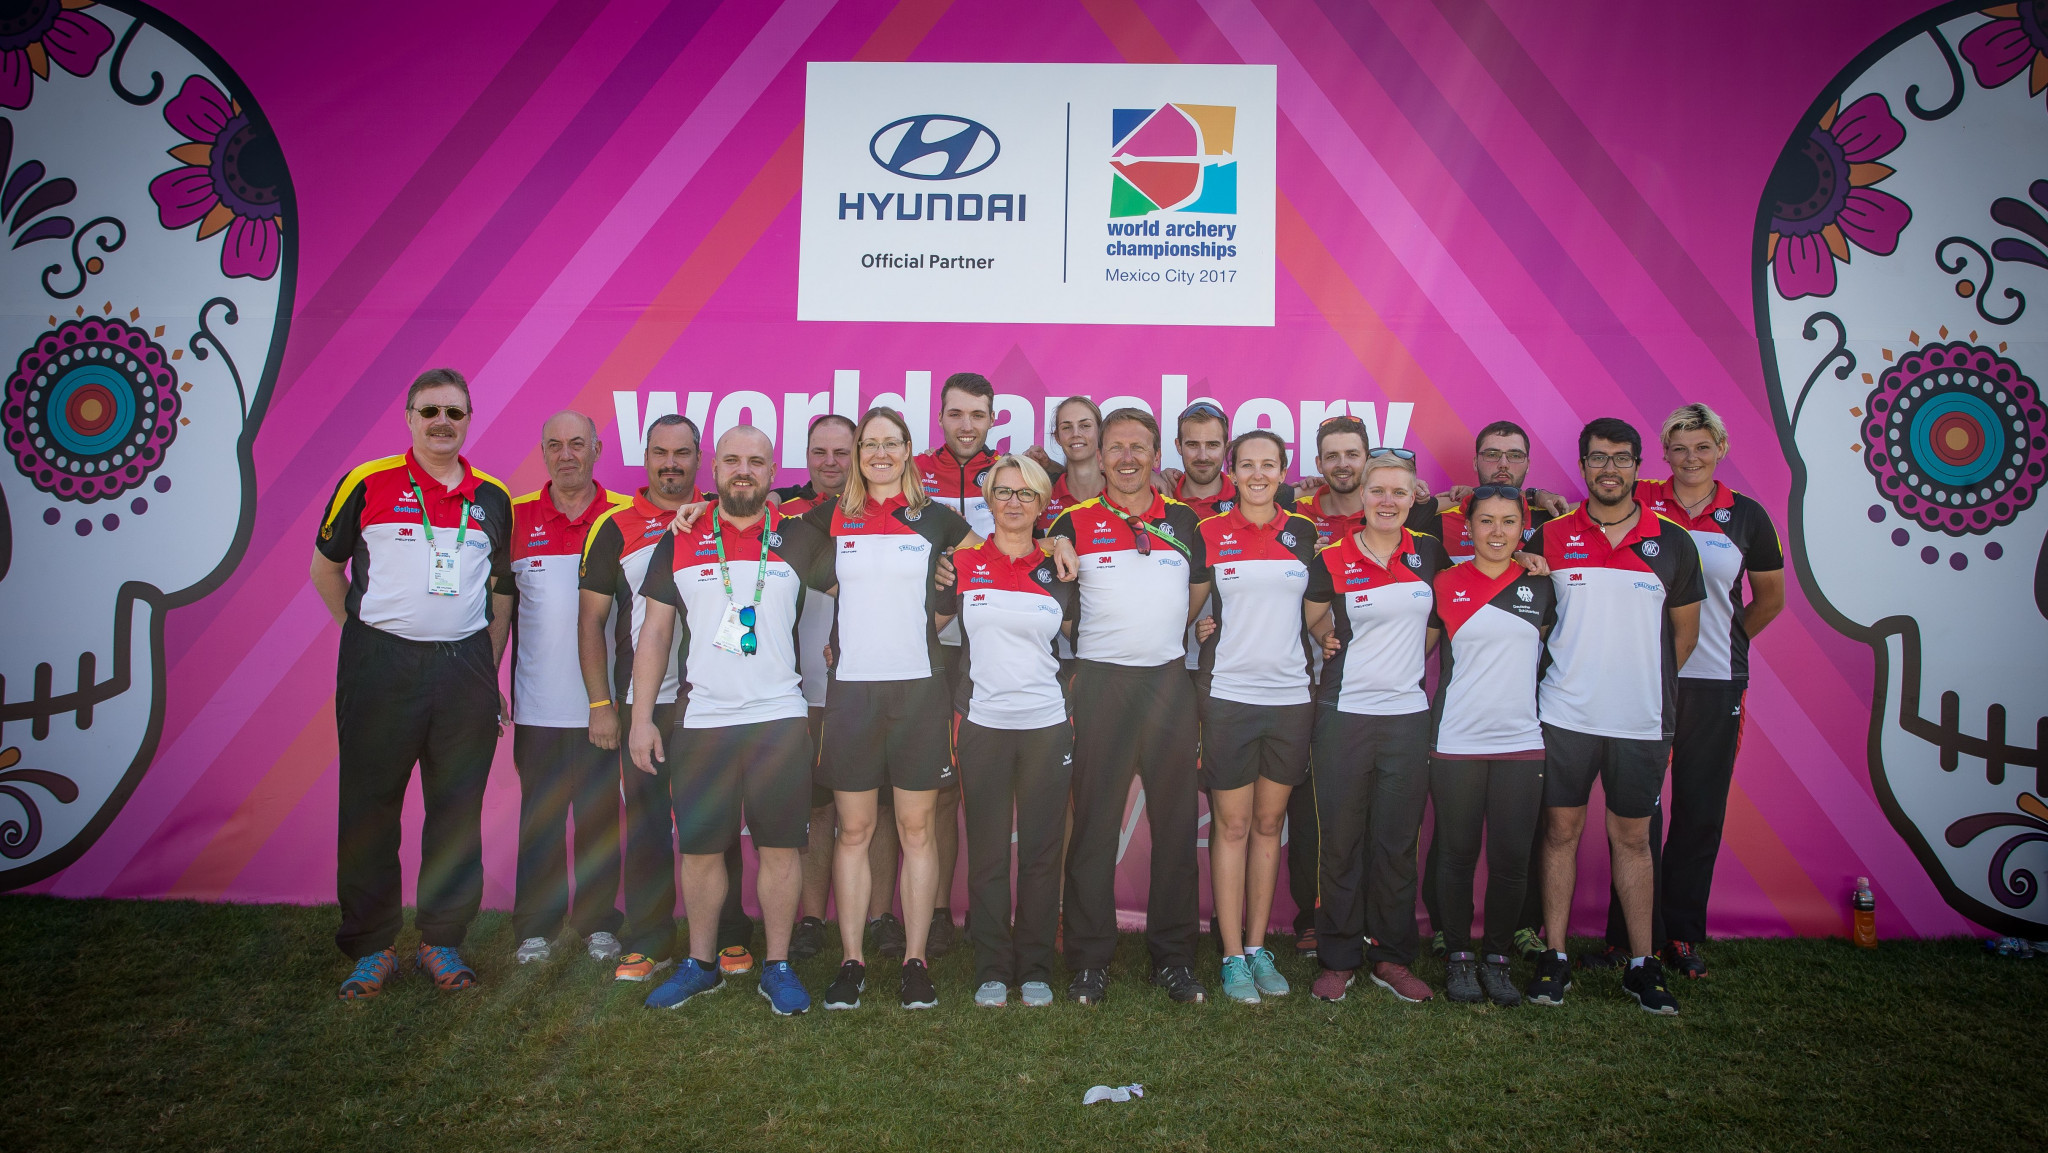 Germany through to compound and recurve mixed team finals at World Archery Championships